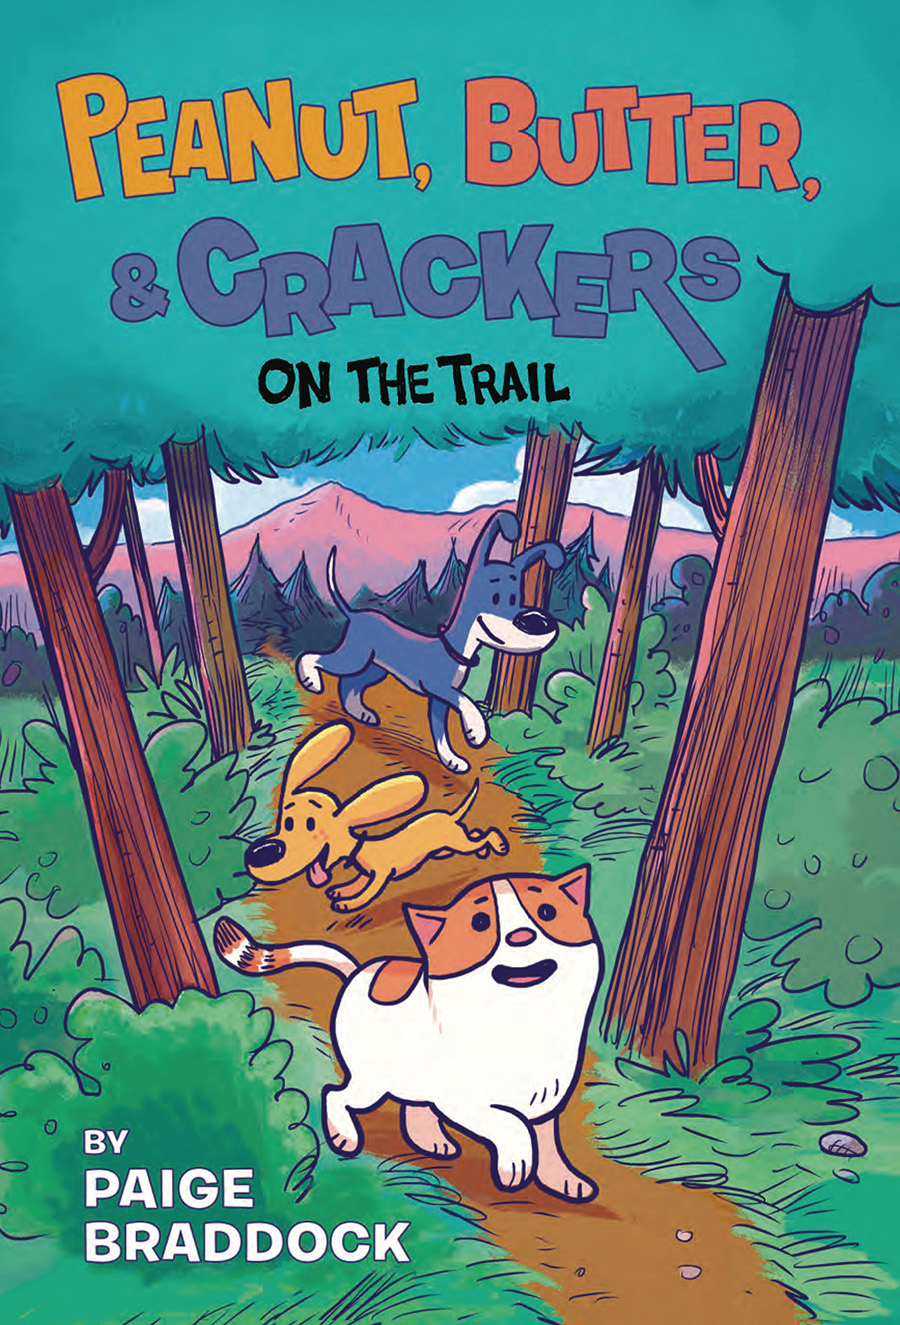 Peanut Butter & Crackers Vol 3 On The Trail HC